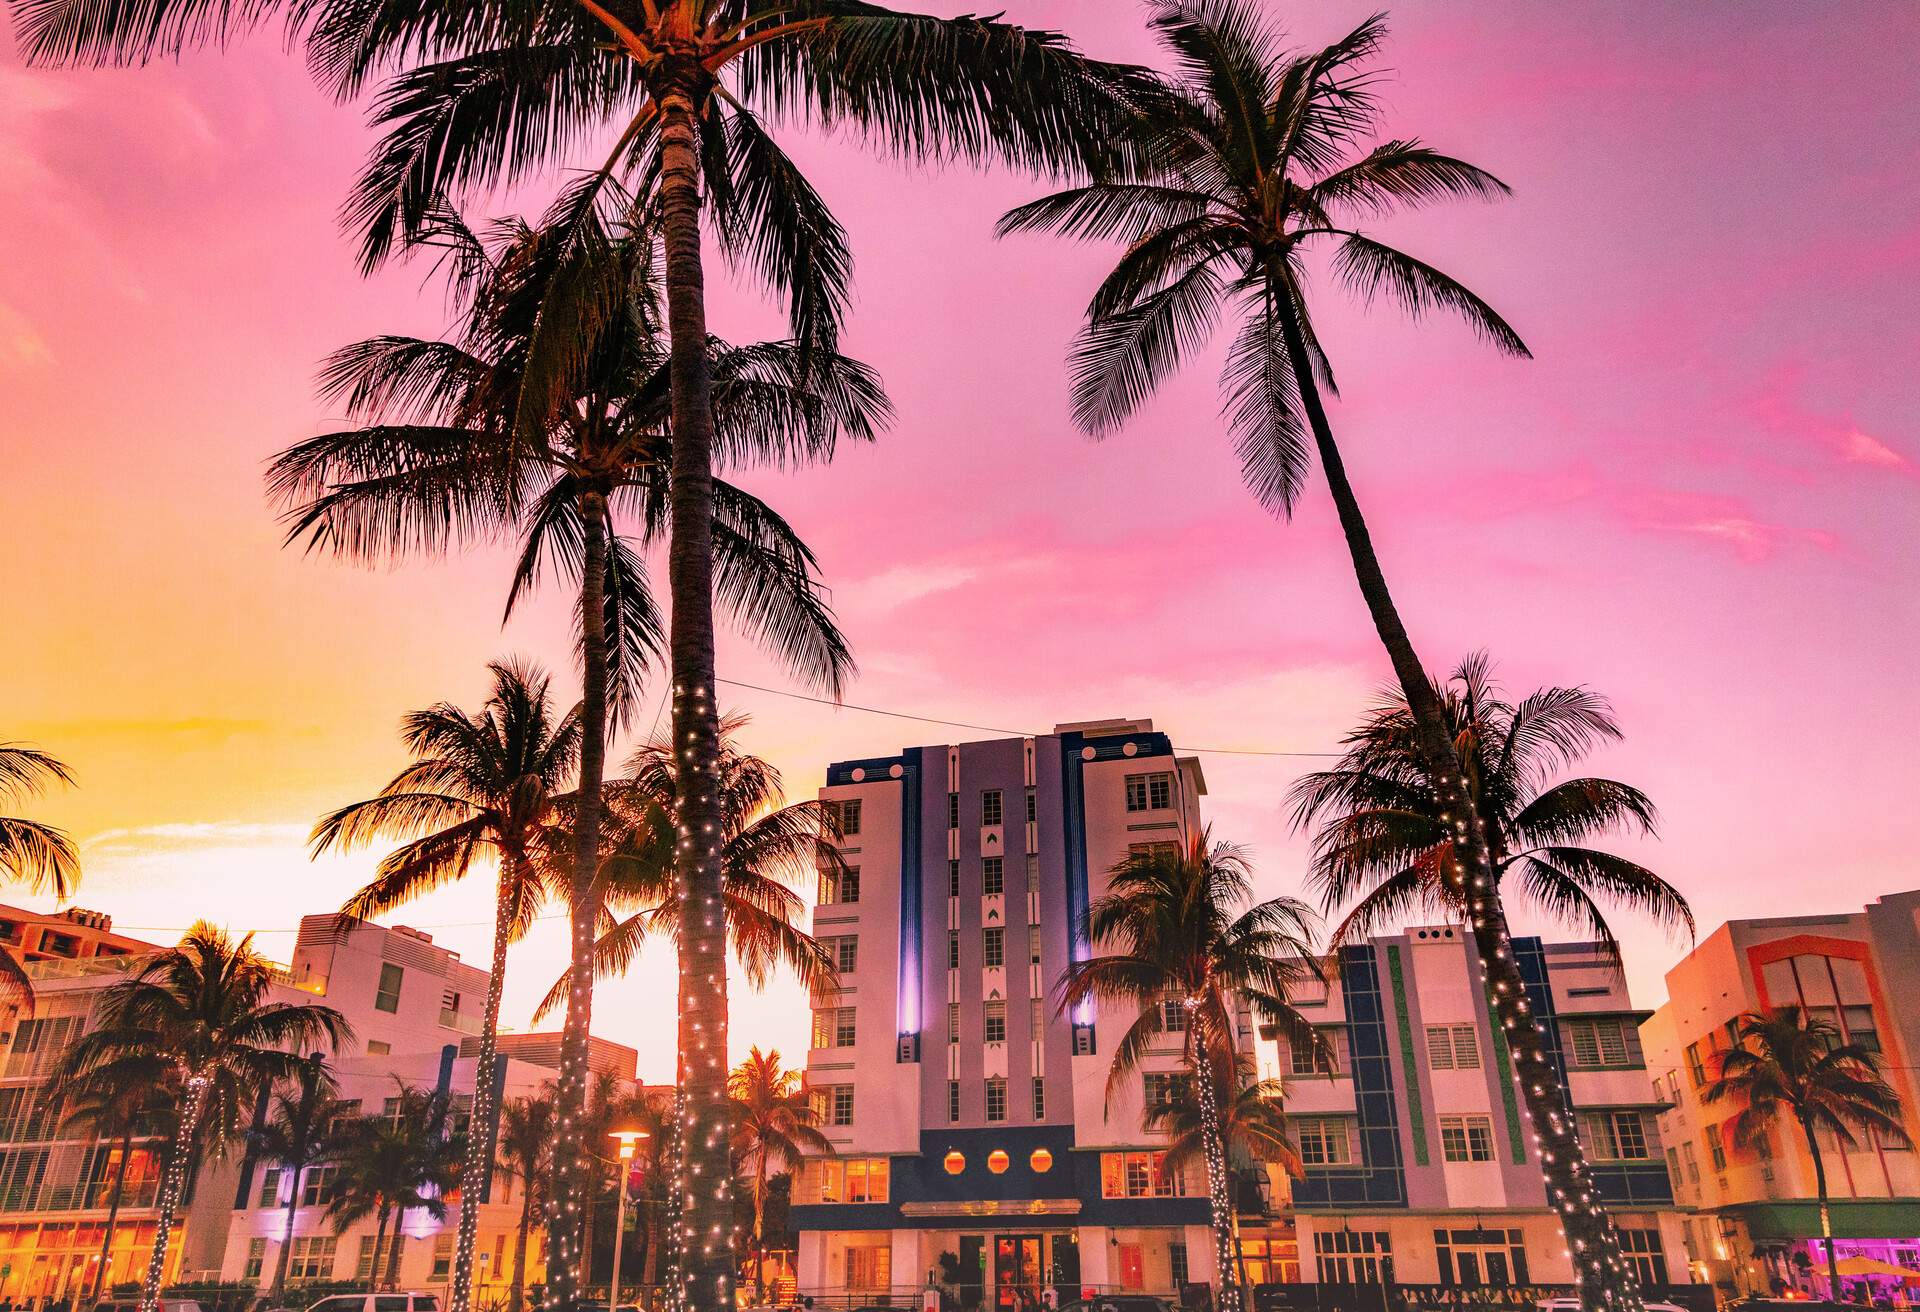 A row of mid-rise commercial buildings along a grove of palm trees wrapped in string lights under a pink sky.